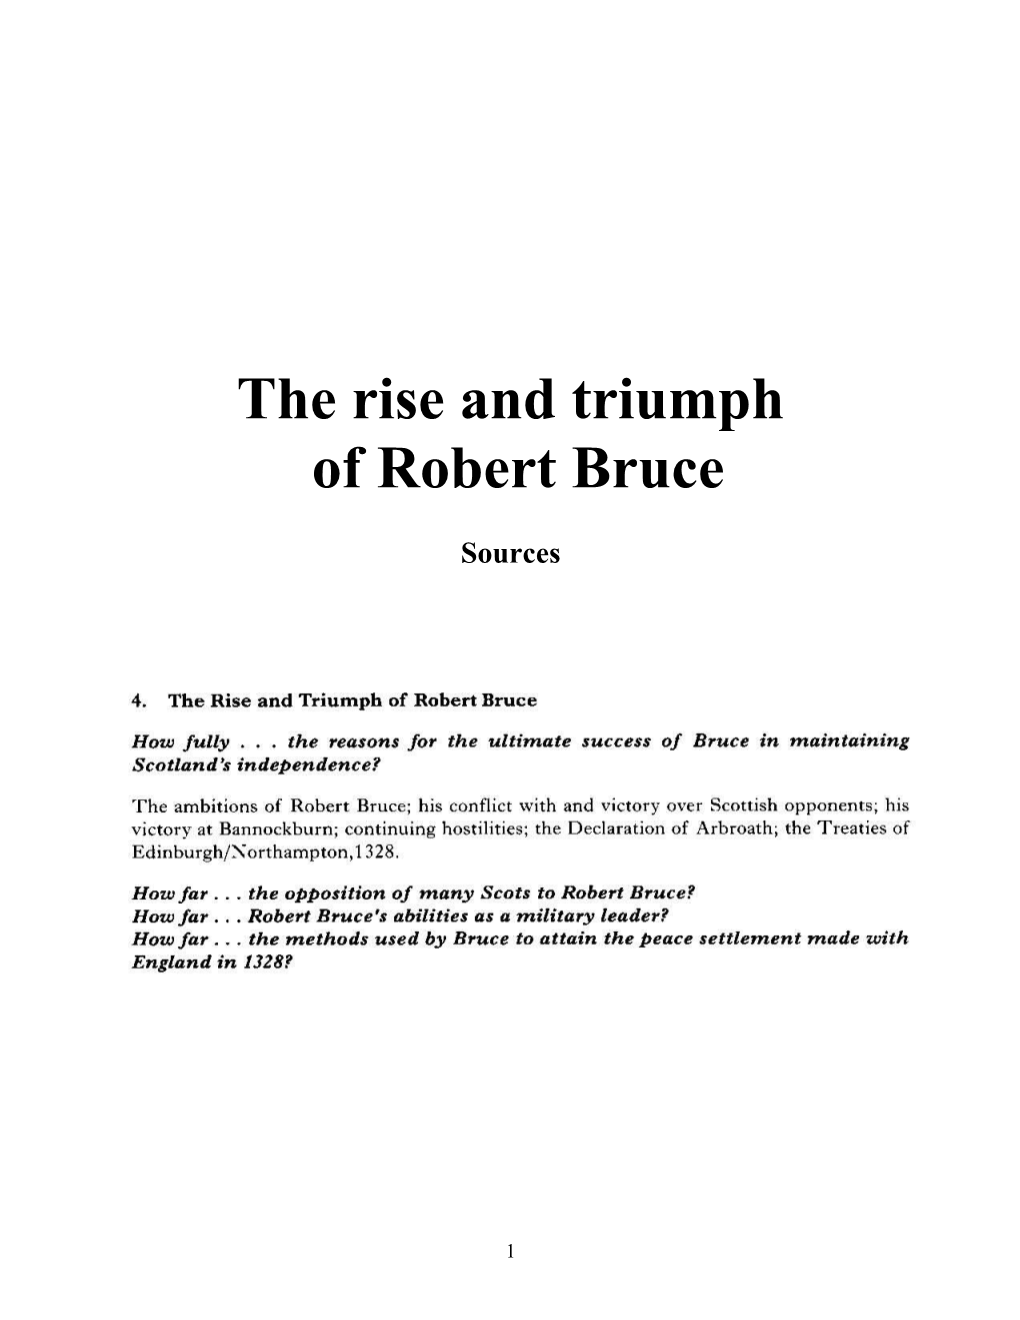 The Rise and Triumph